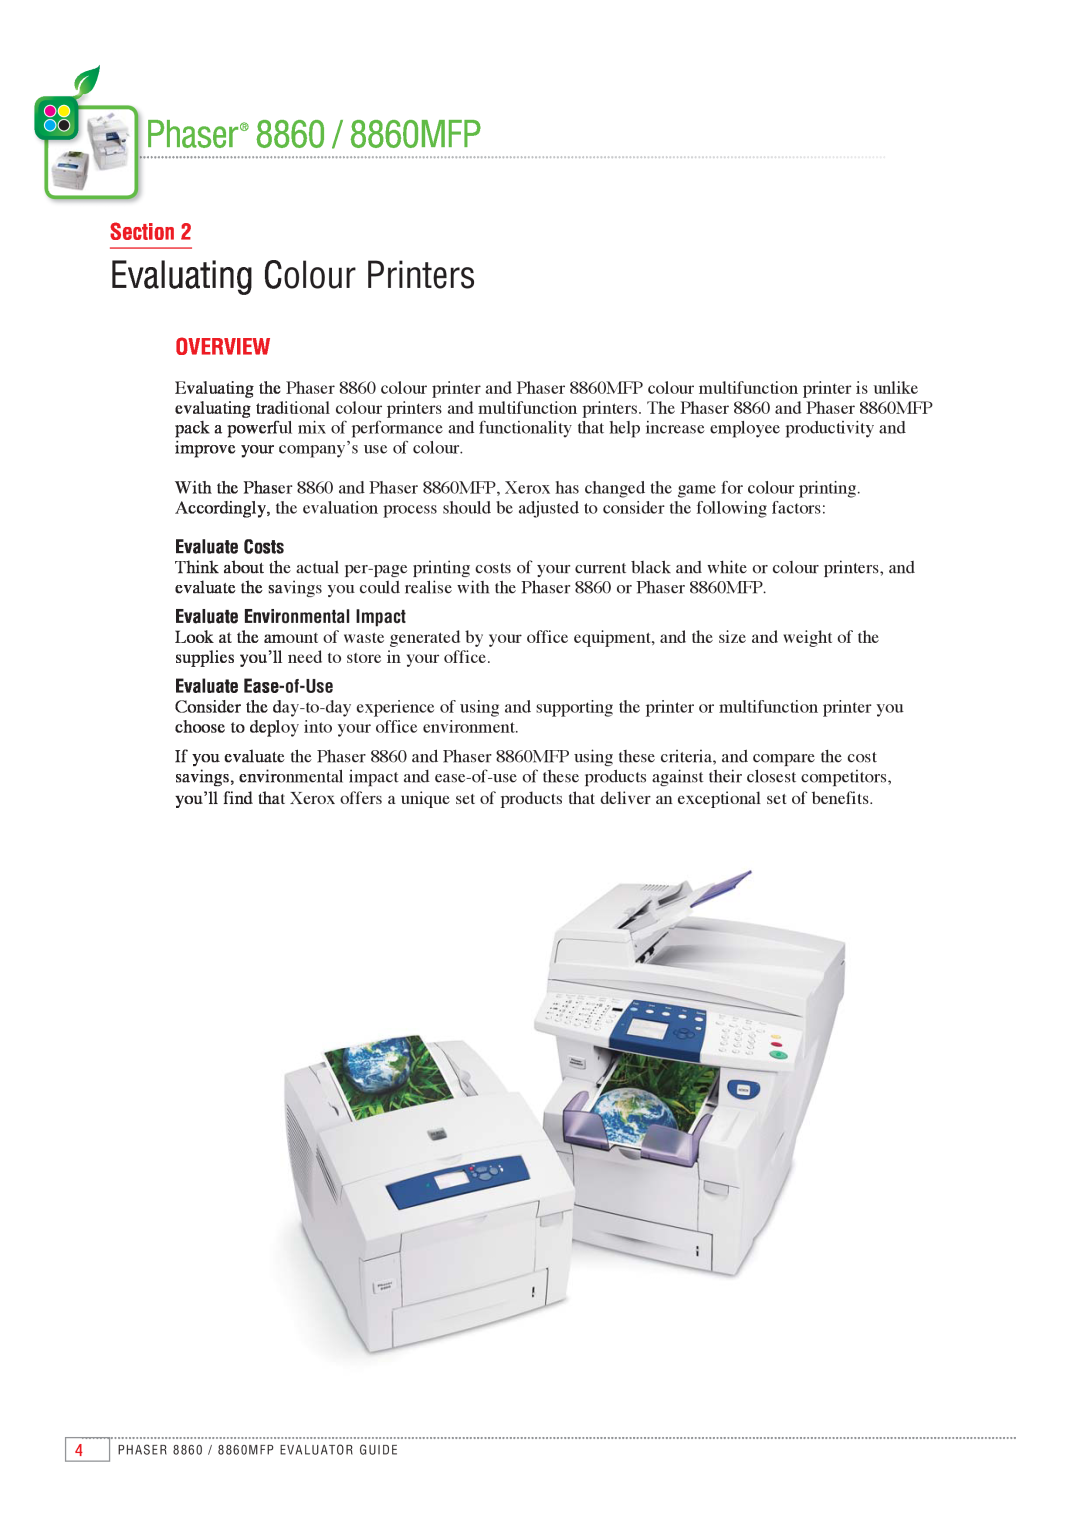 Xerox manual Section, Overview, Phaser 8860 / 8860MFP, Evaluating Colour Printers 